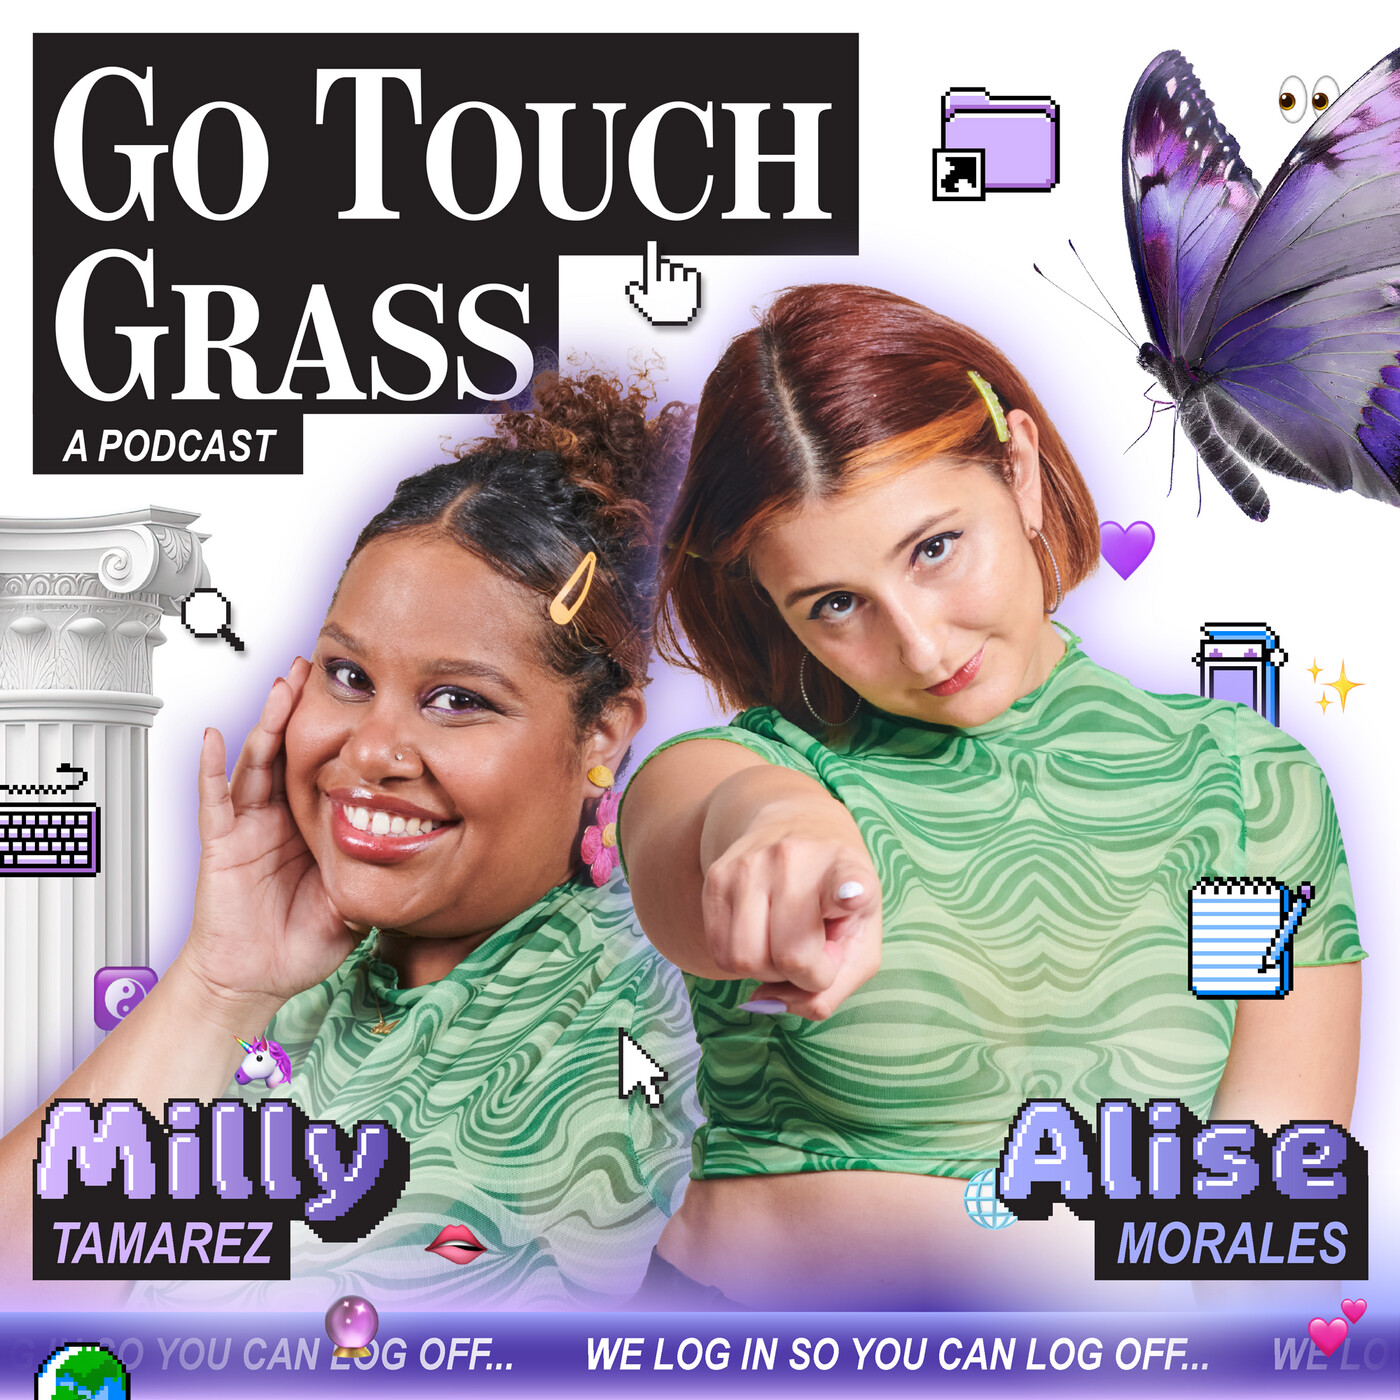 Go Touch Grass podcast show image